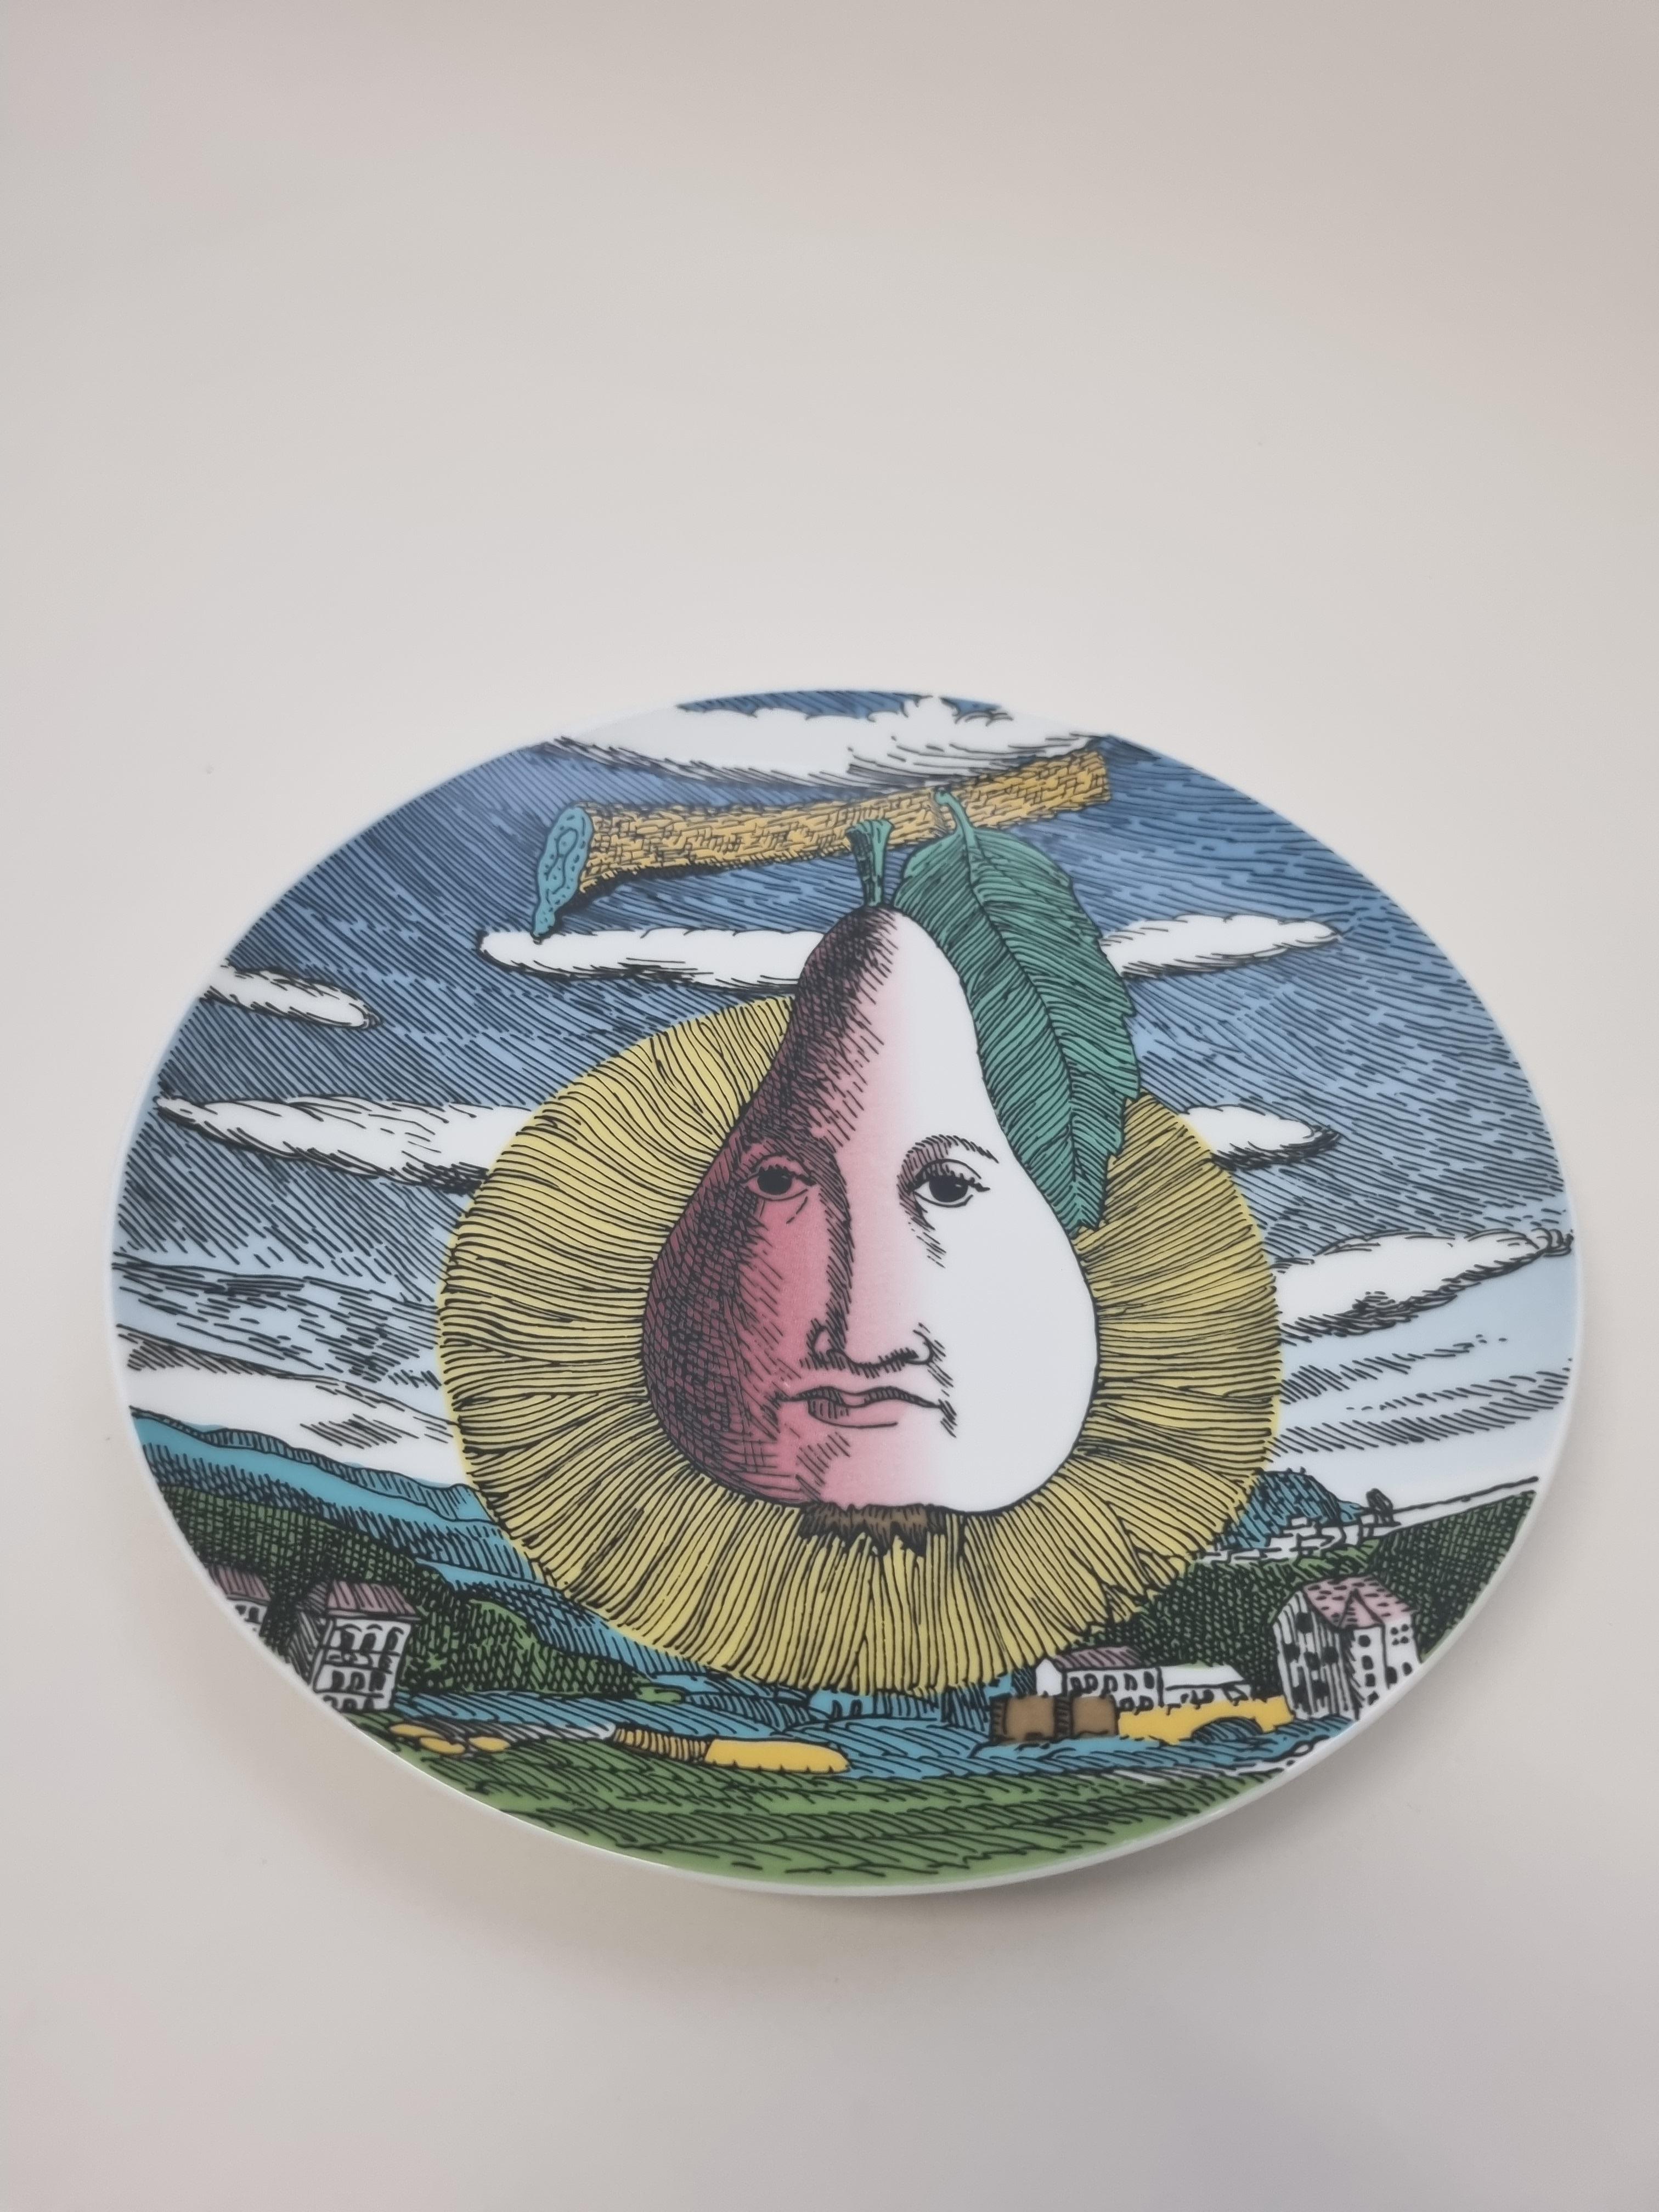 Fornasetti porcelain plate for Rosenthal - 12 Mesi 12 Soli.

Plate No. 9, Settembre September. 

No damage. Very good condition.

Dimensions:
Diameter 10,2